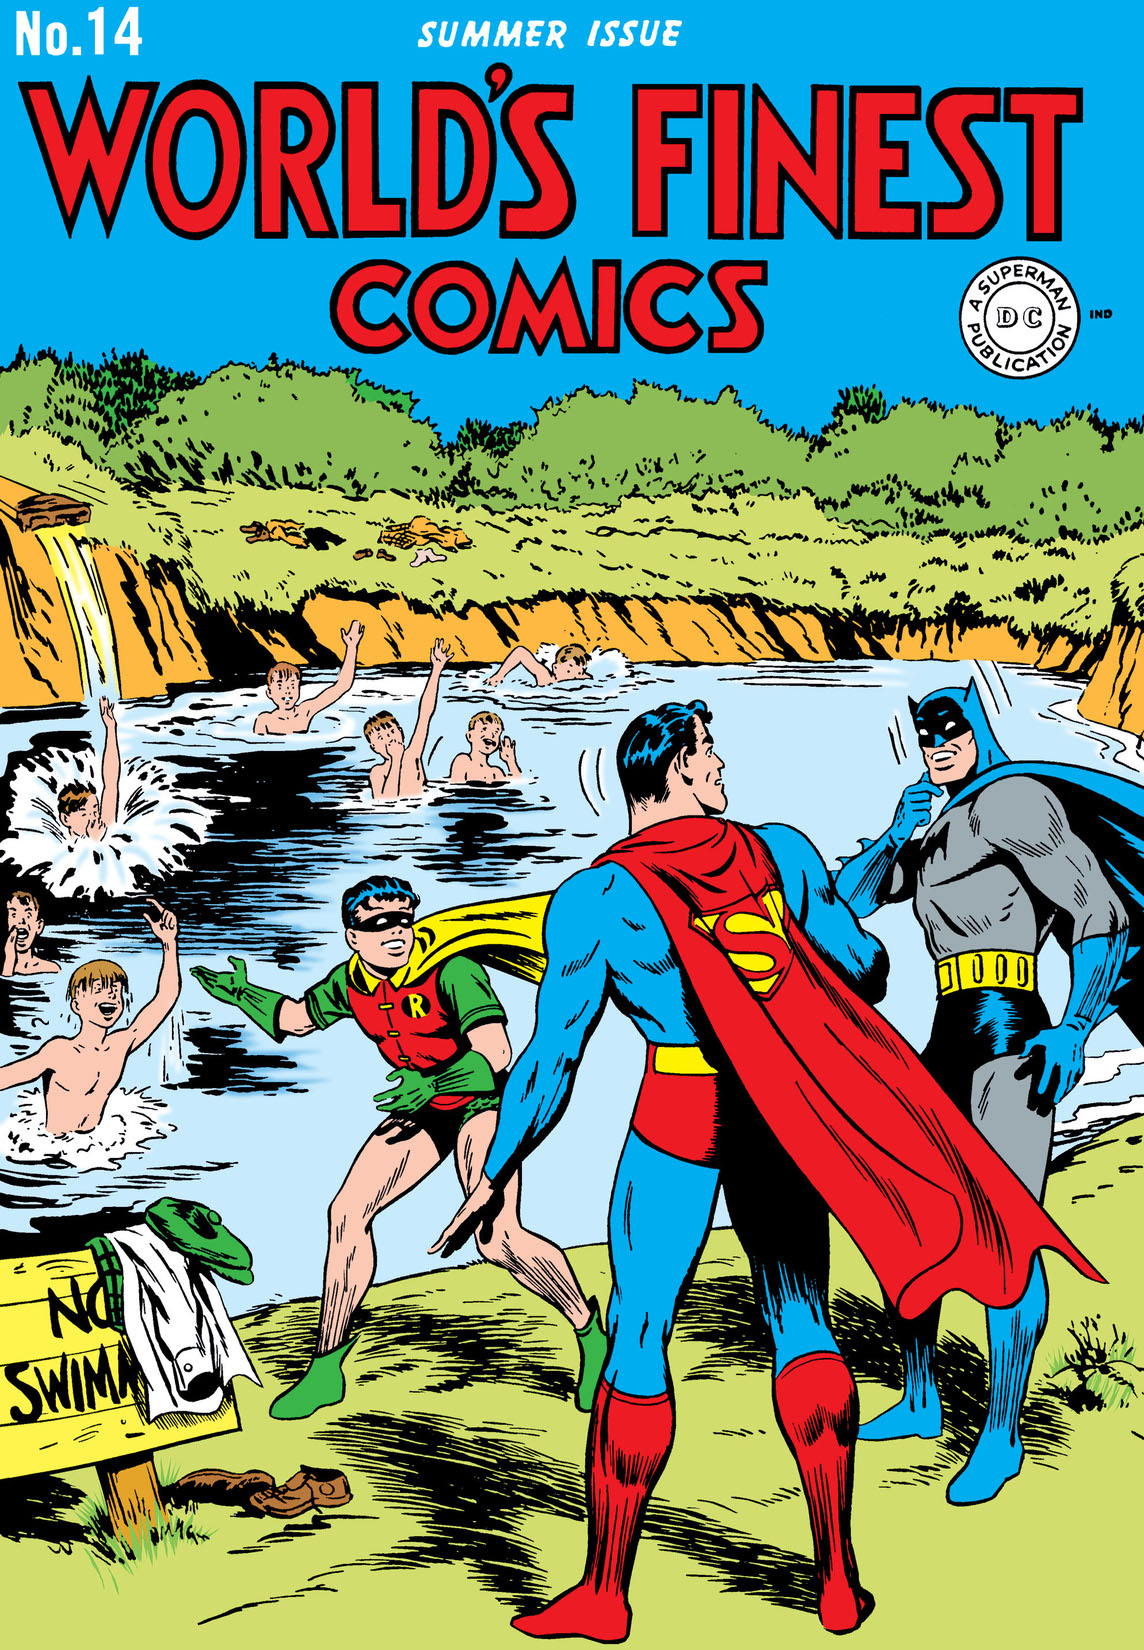 World's Finest Comics (1941-) #14 preview images